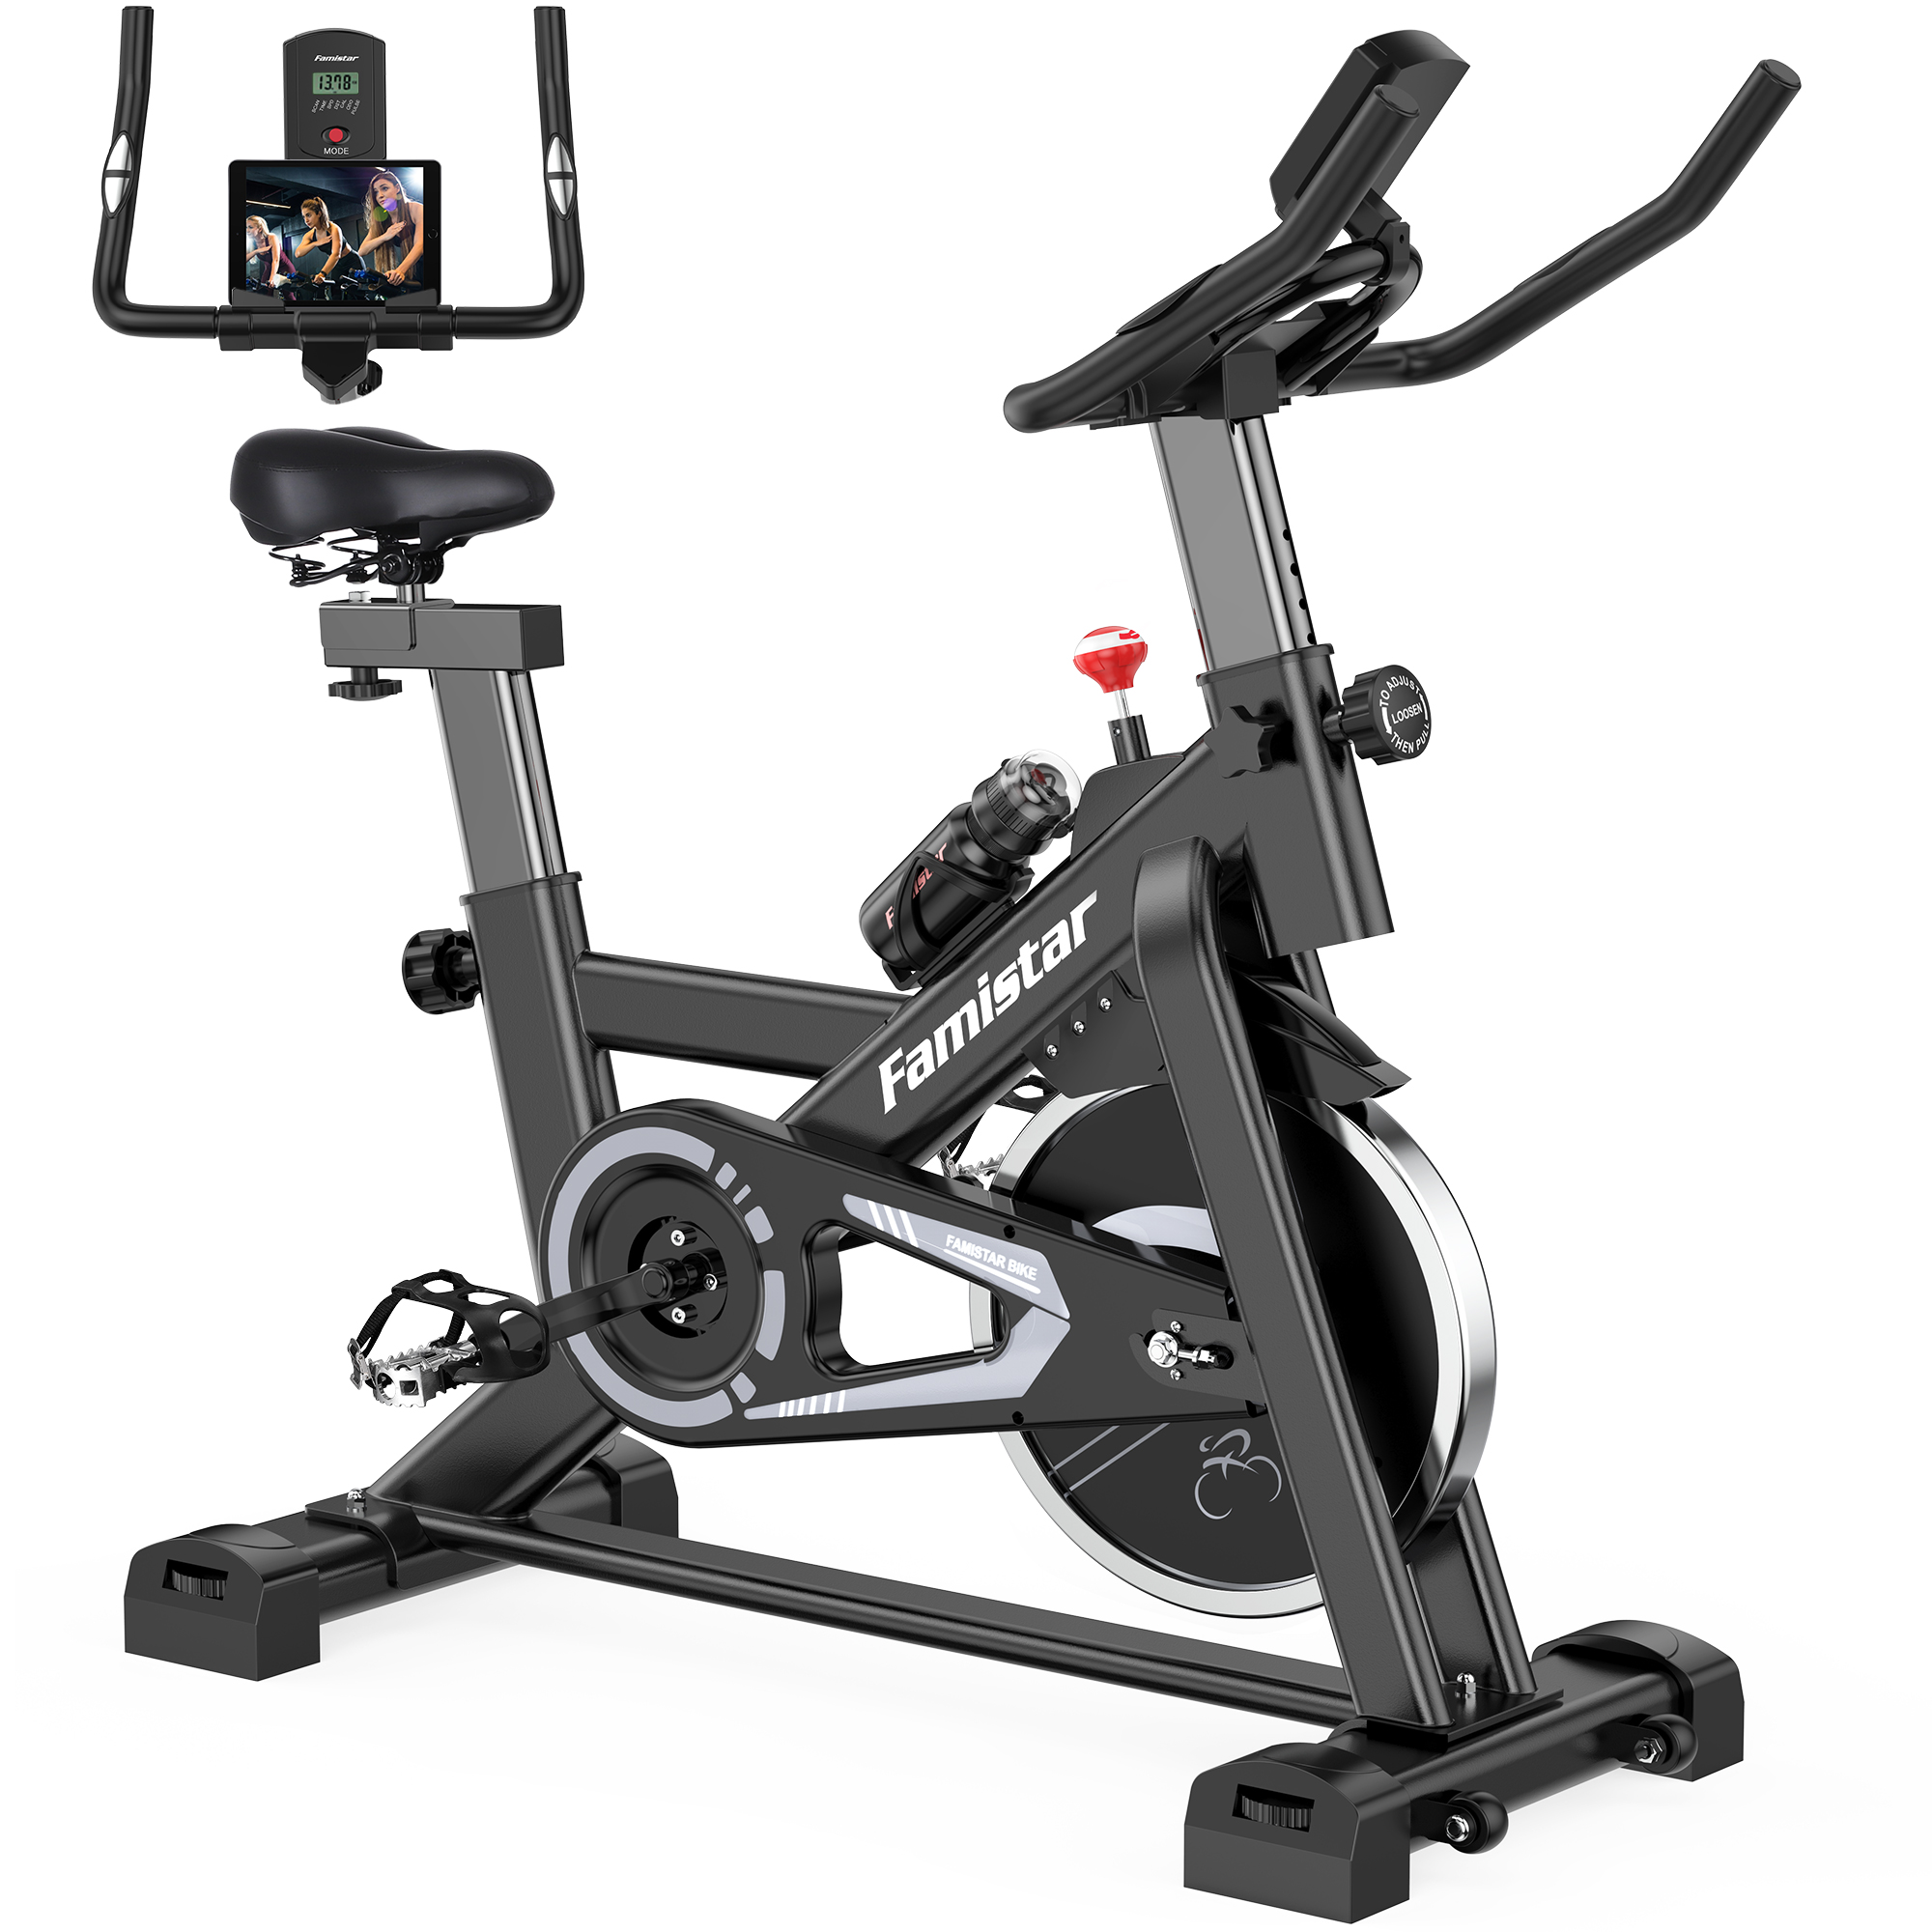 Famistar Exercise Bike, Stationary Indoor Cycling Bike for Home Gym, Fitness Exercise Bike with LCD Display Monitors, Bottle Holder, Adjustable Seat Stationary Bike Exercise Equipment - image 1 of 14